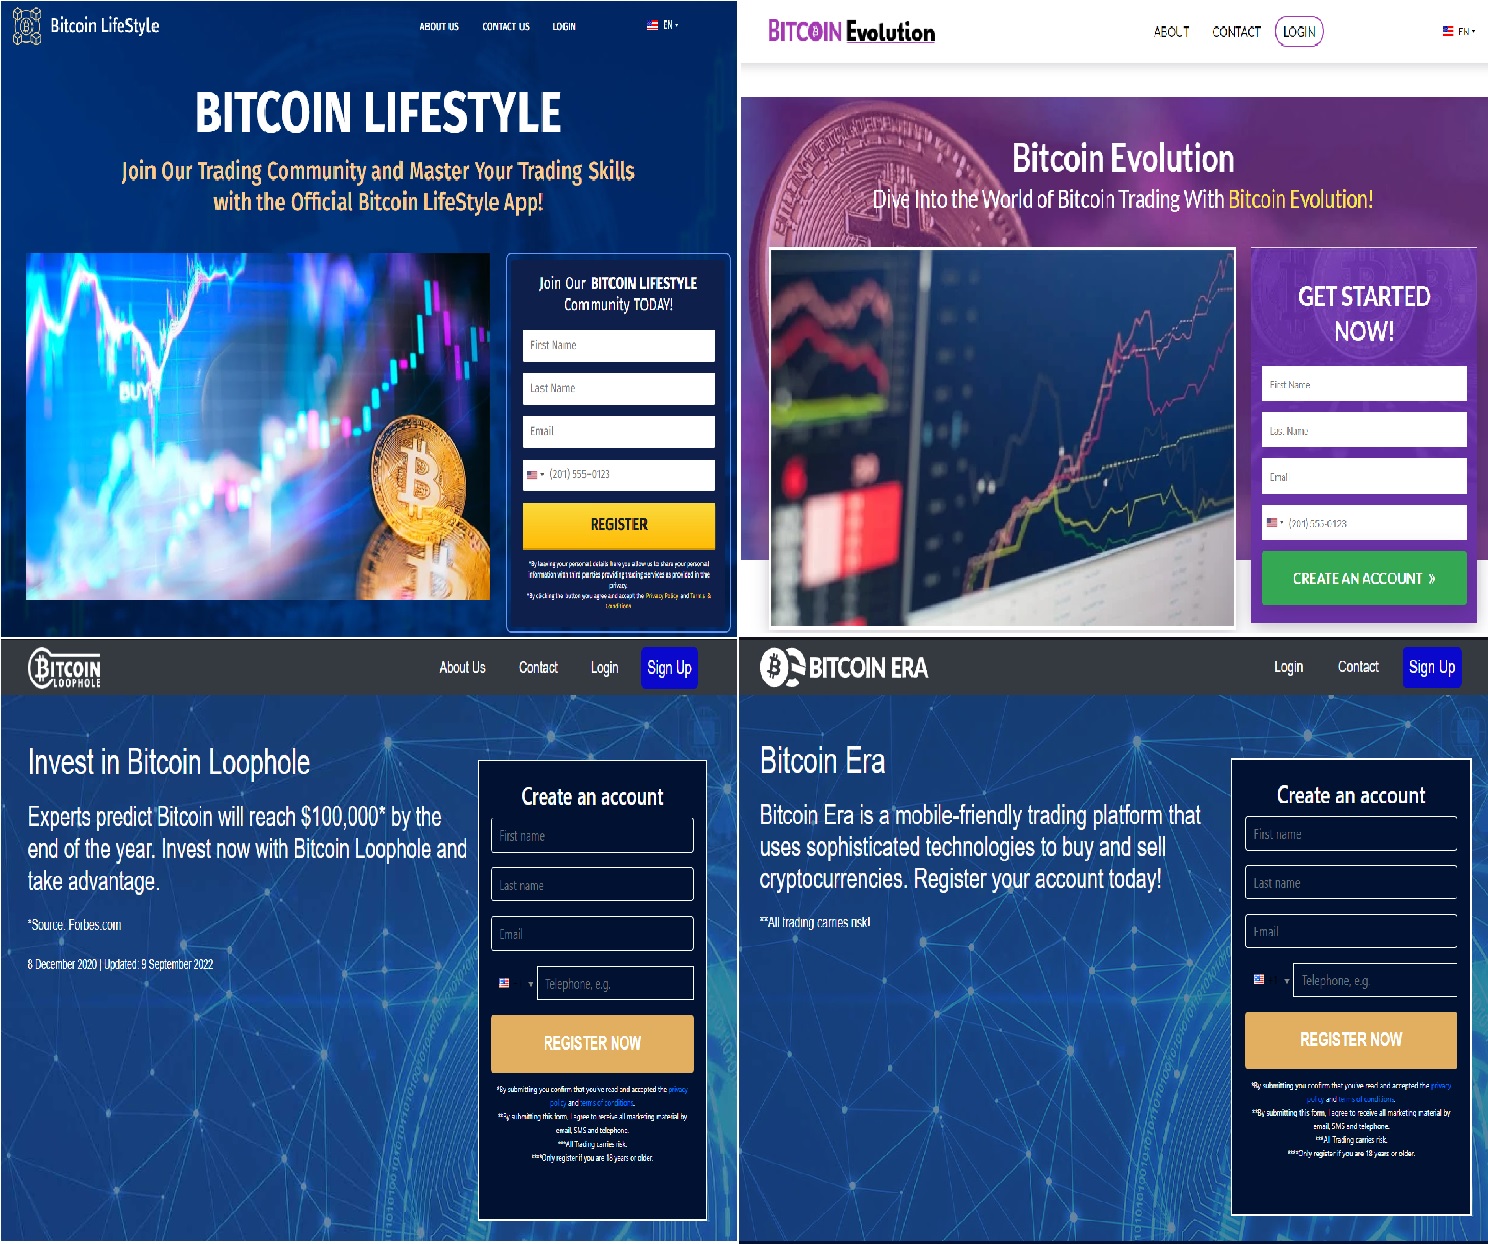 Is Bitcoin Lifestyle a Scam Duplicates